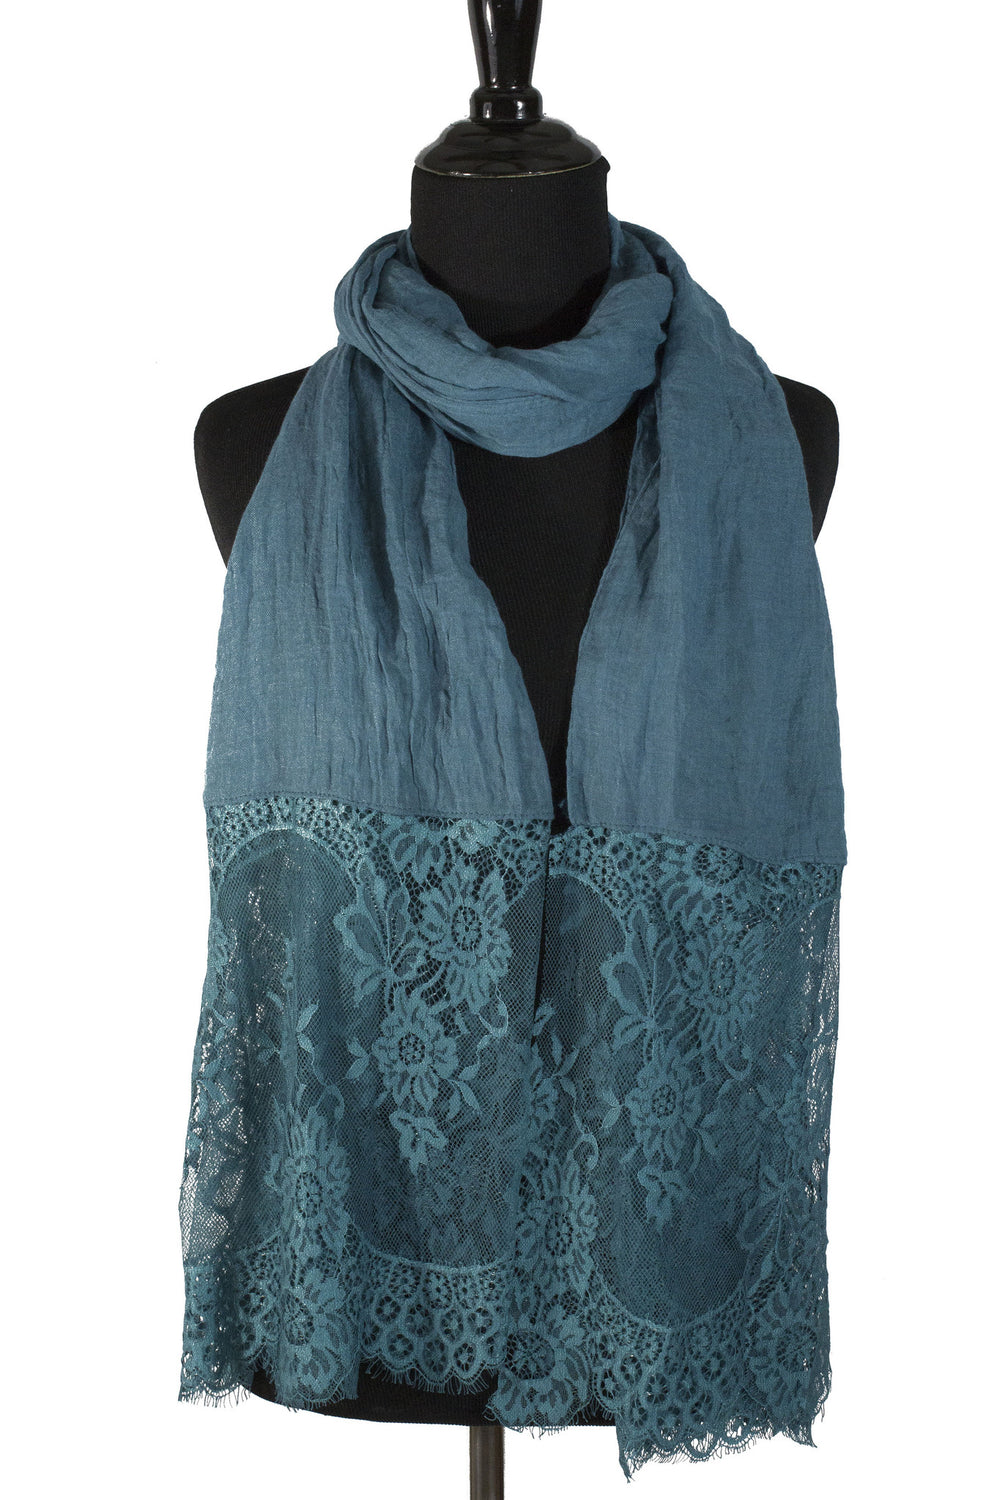 teal blue premium viscose hijab with lace ends and lace trim